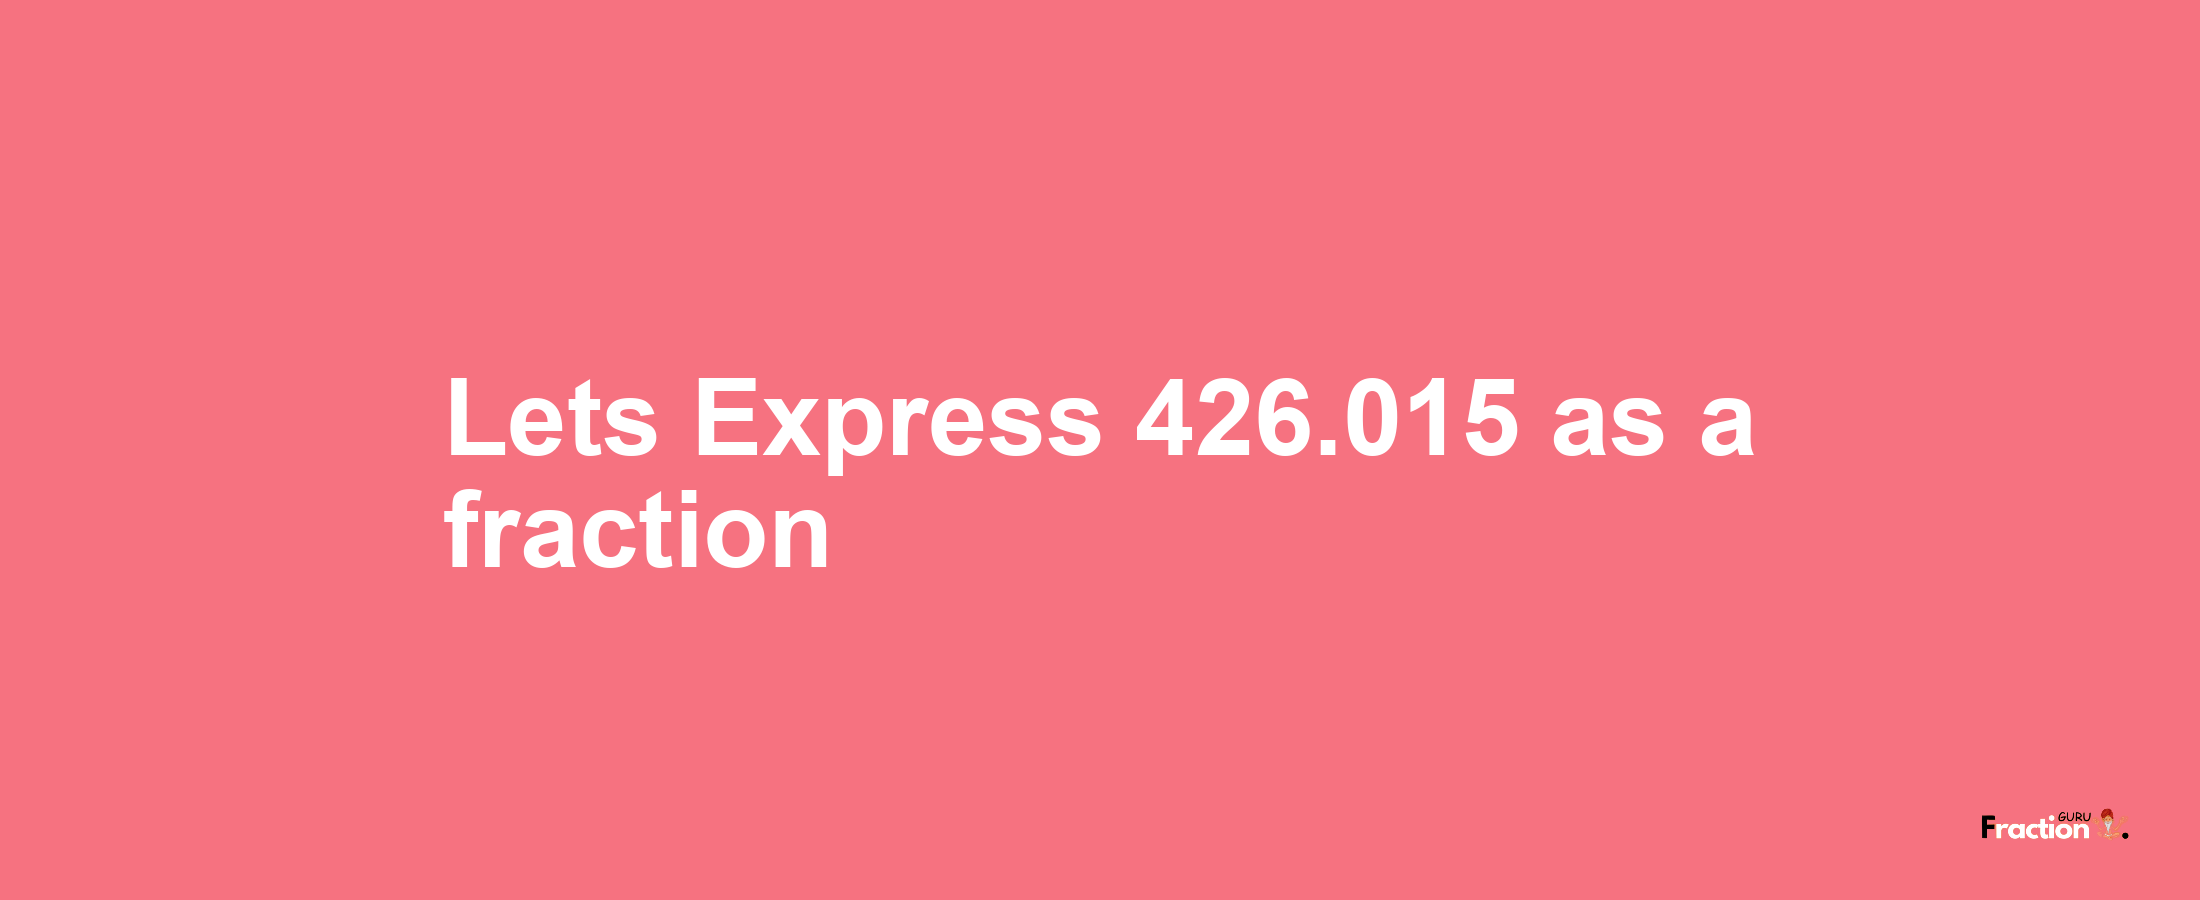 Lets Express 426.015 as afraction